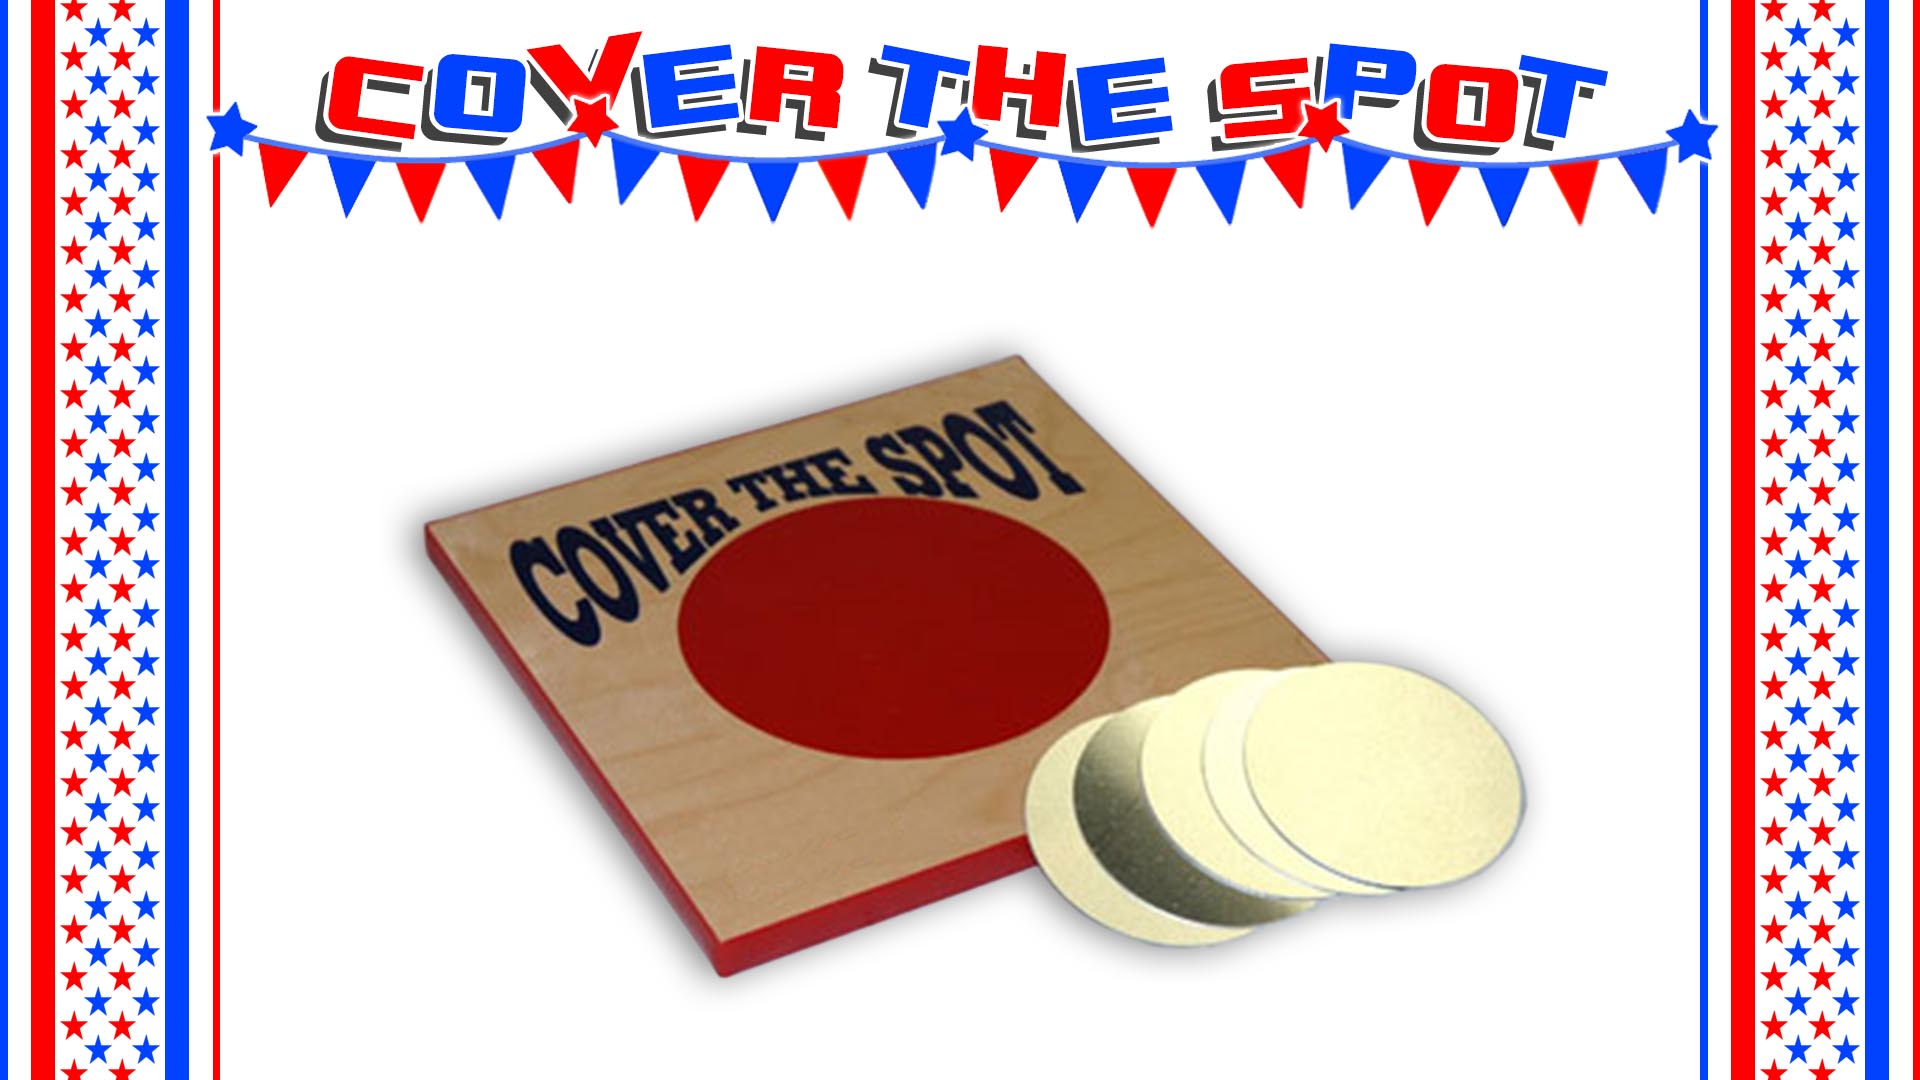 cover the spot carnival game